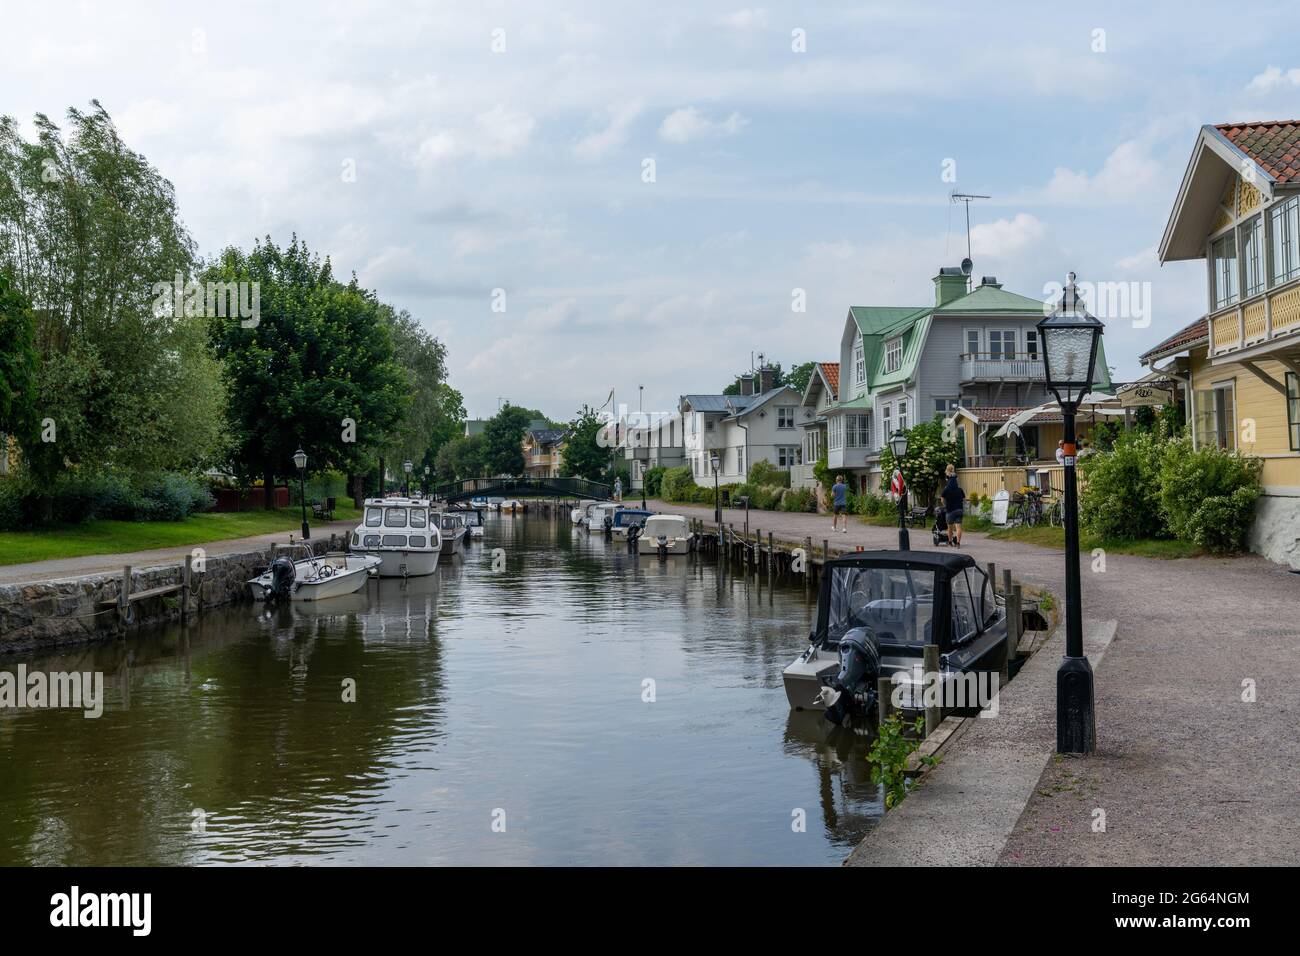 Trosa, Sweden - 22 June, 2021: many boats line the canals of the harbor front in the idyllic Swedish village of Trosa Stock Photo